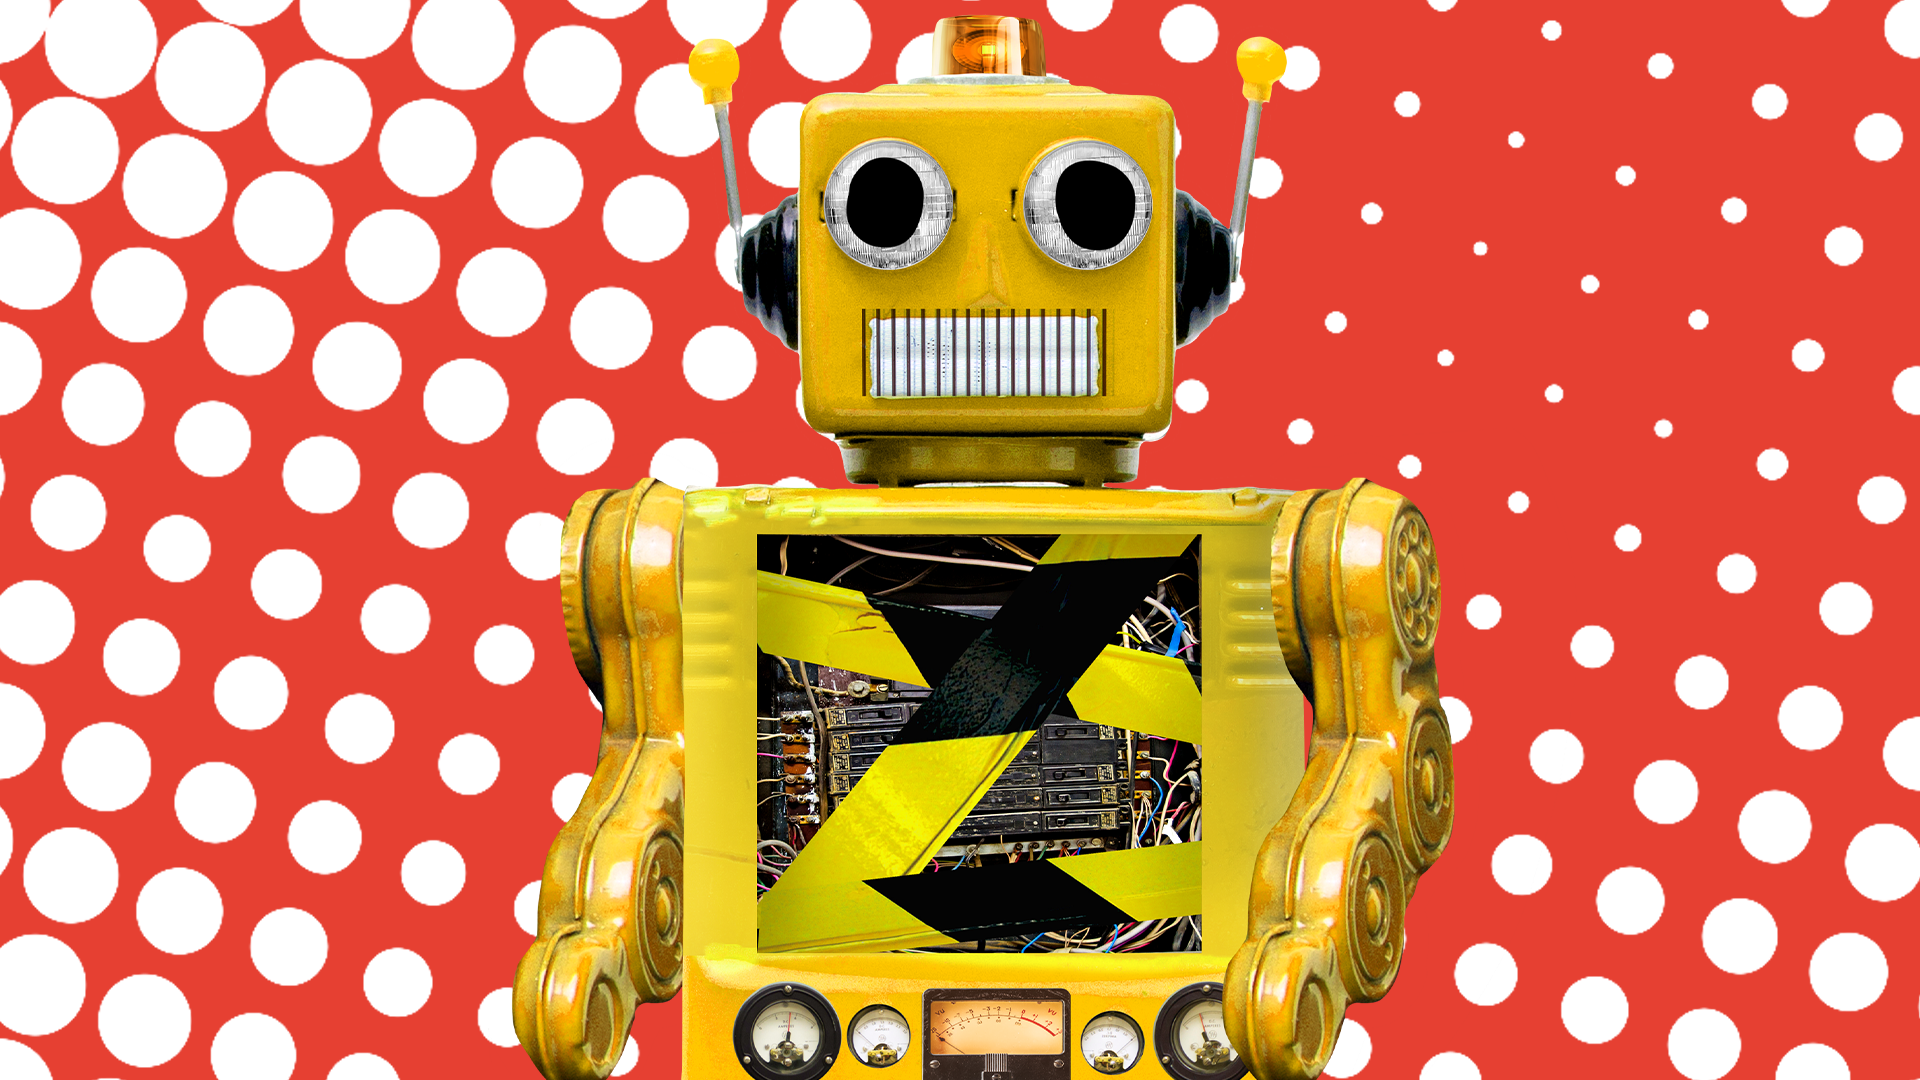 Beano robot on red and white background